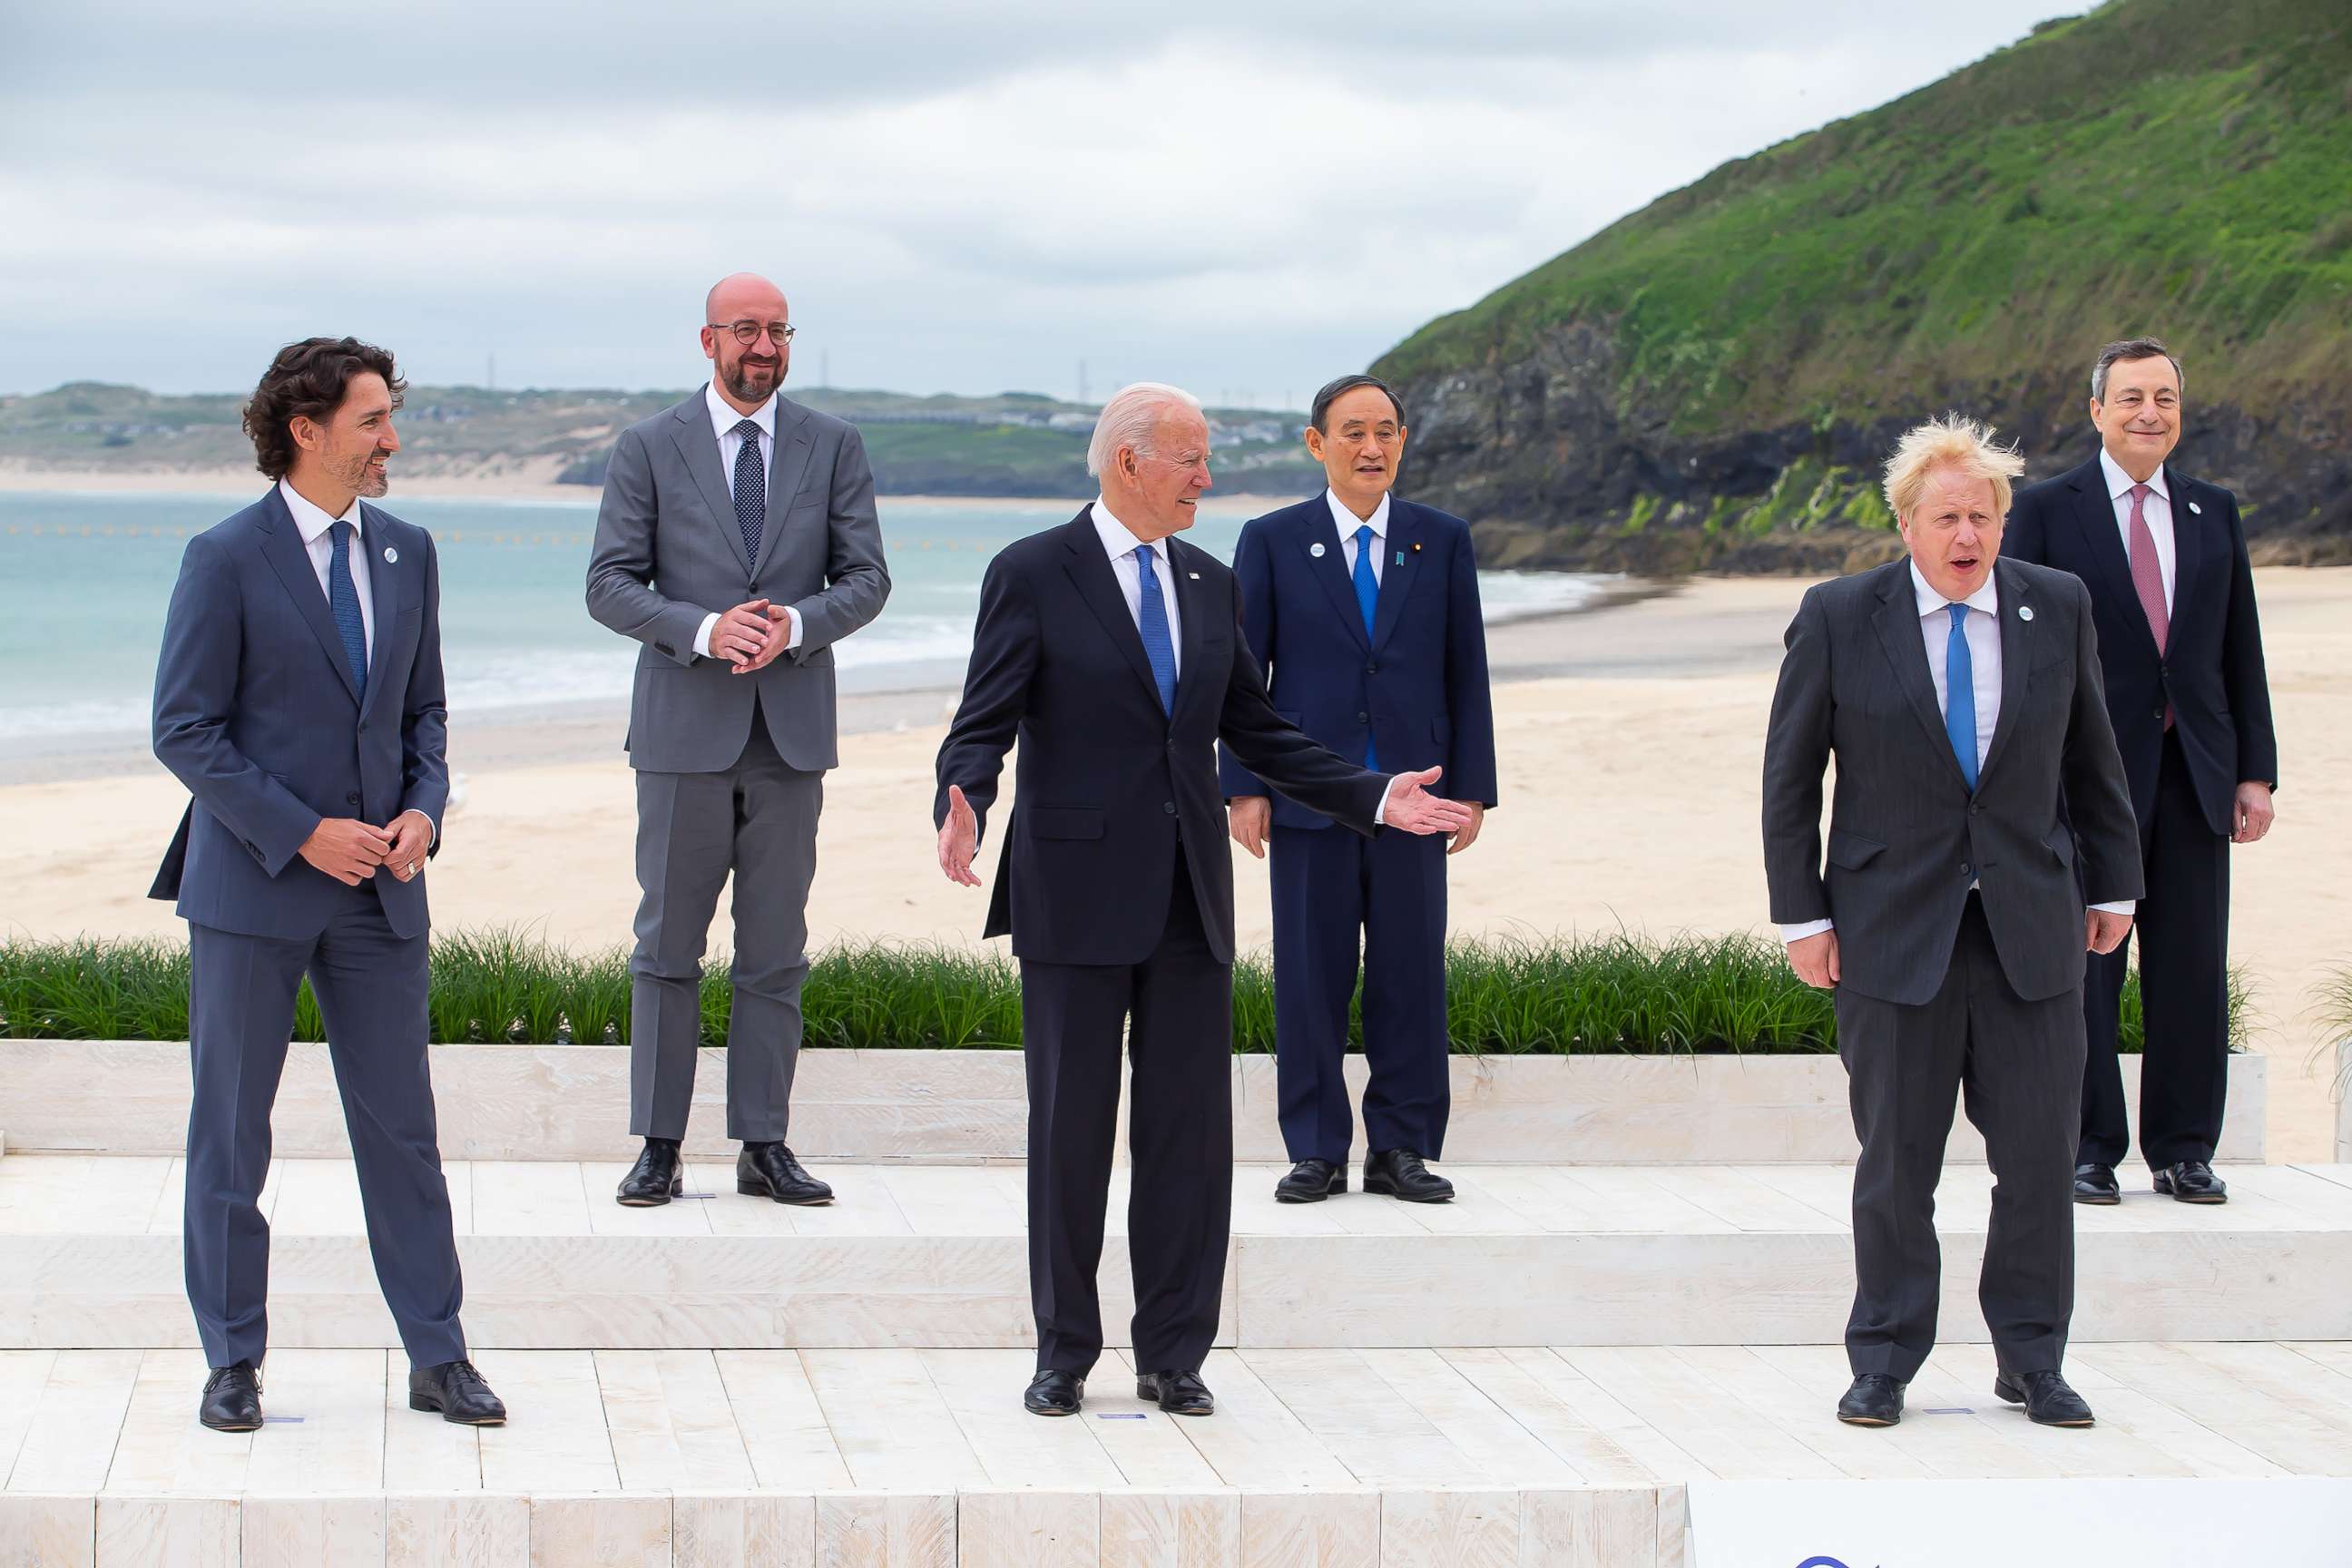 PHOTO: President Joe Biden, center, stands with other world leaders including U.K. Prime Minister Boris Johnson, right and Prime Minister of Canada, Justin Trudeau, left, during the G7 Summit, June 11, 2021, in Carbis Bay, Cornwall, U.K.